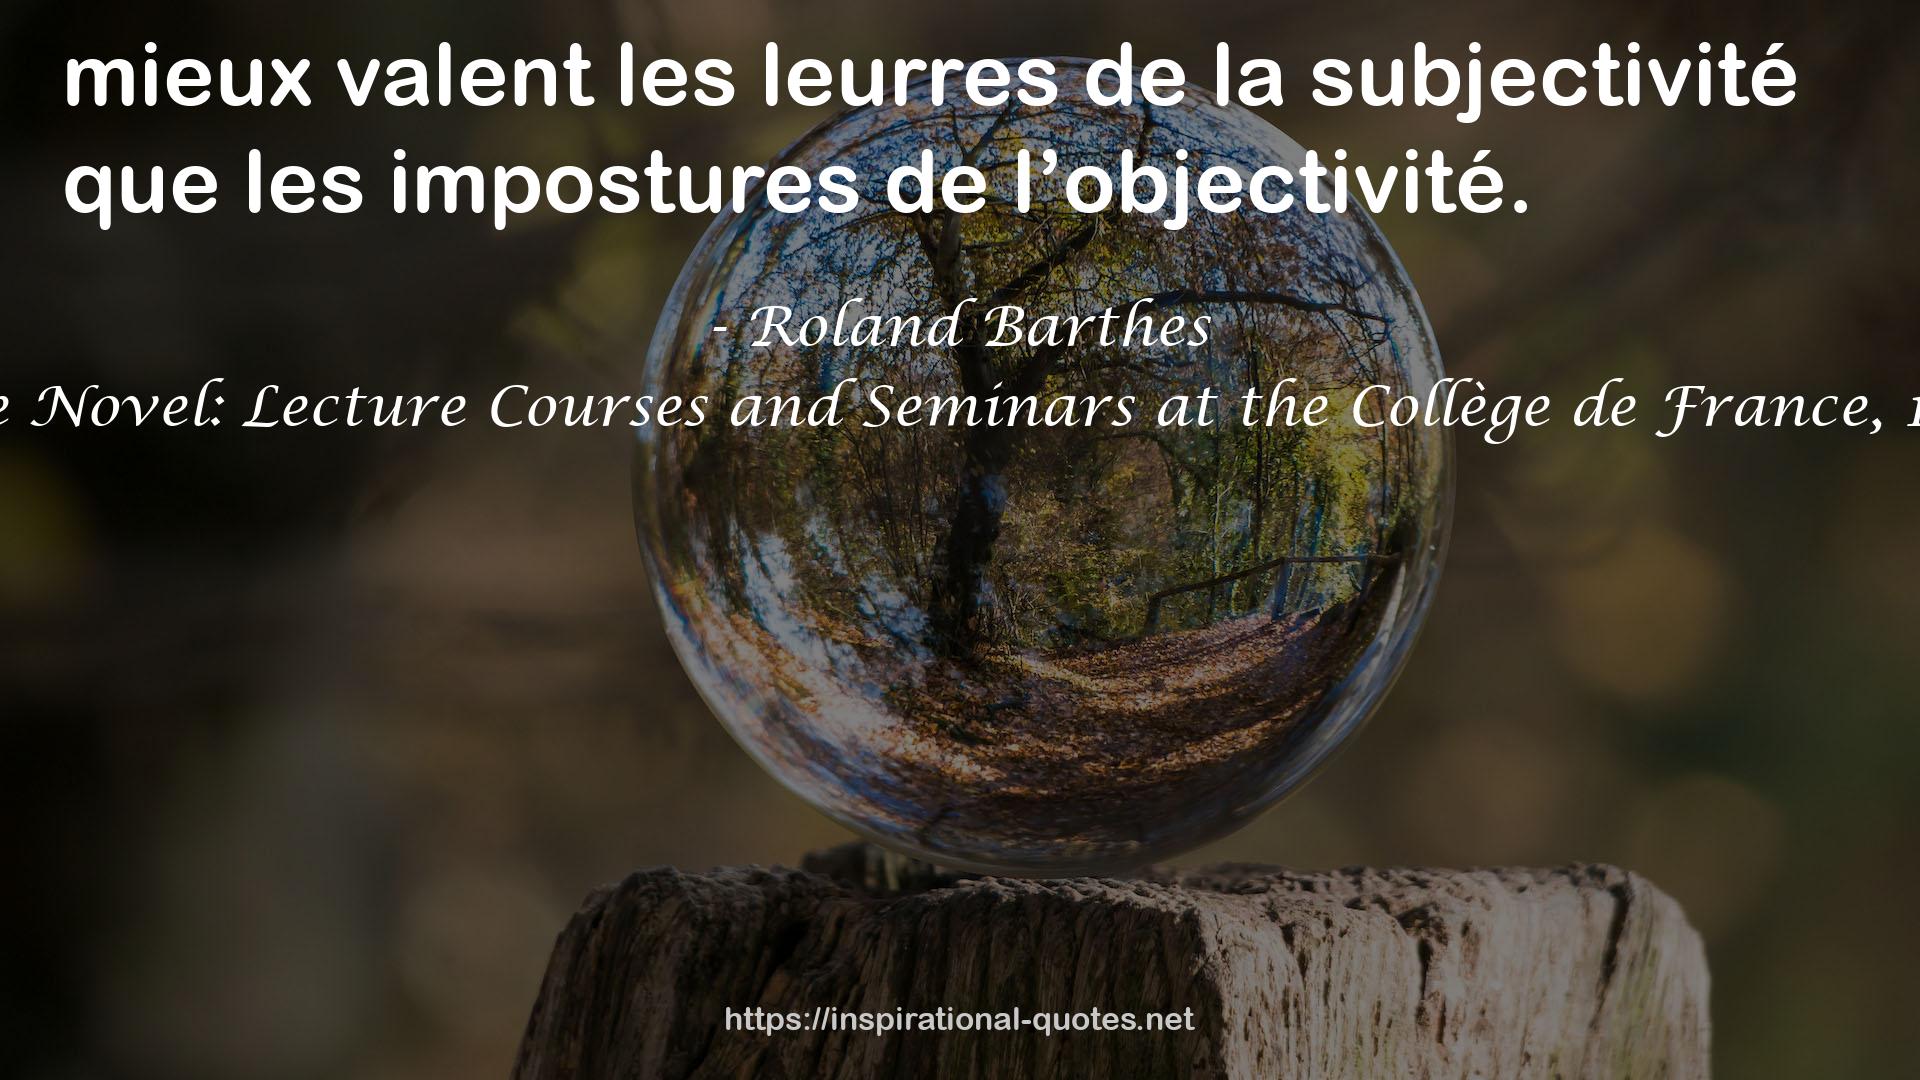 The Preparation of the Novel: Lecture Courses and Seminars at the Collège de France, 1978-1979 and 1979-1980 QUOTES